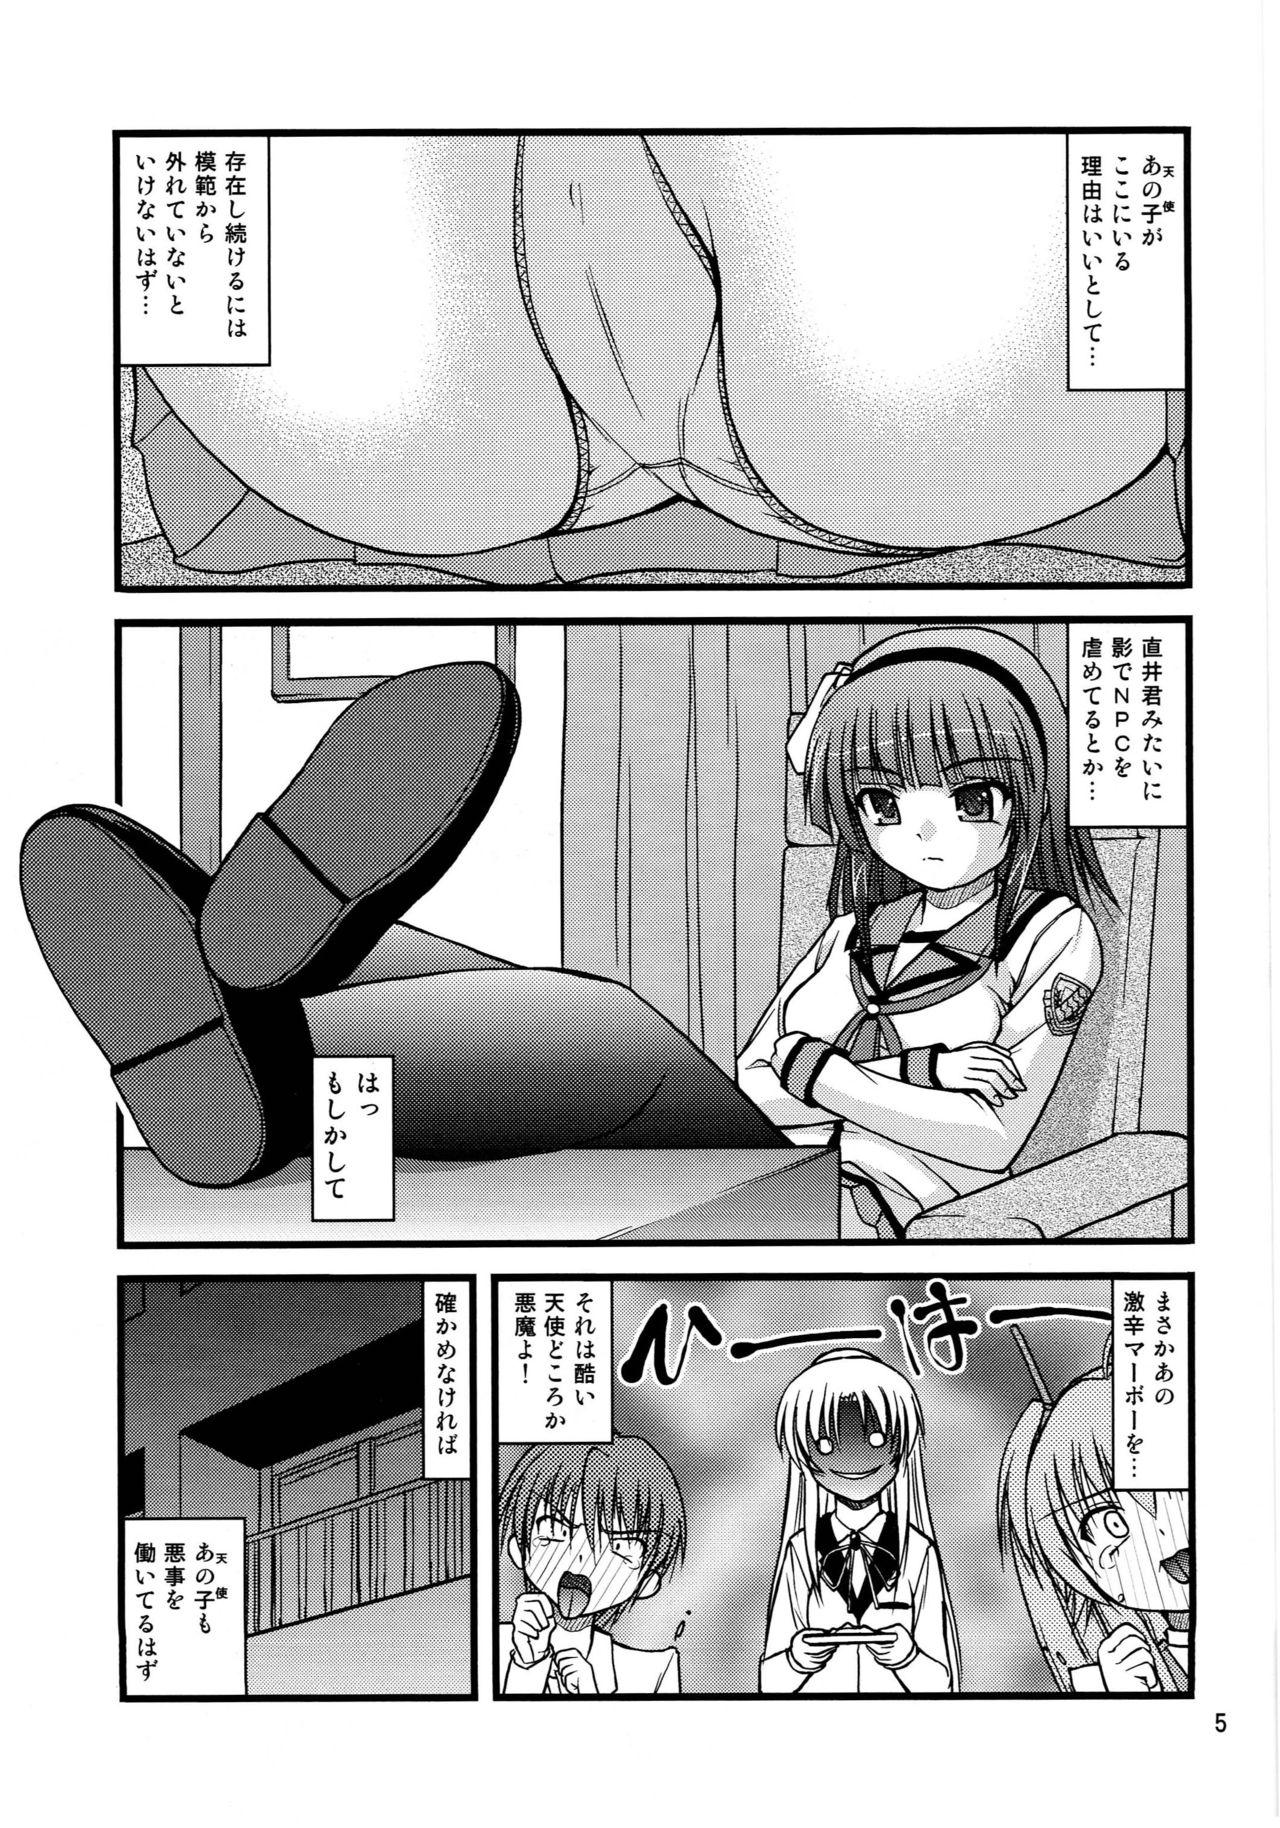 Butts Kana * Yuri - Angel beats Old And Young - Page 4